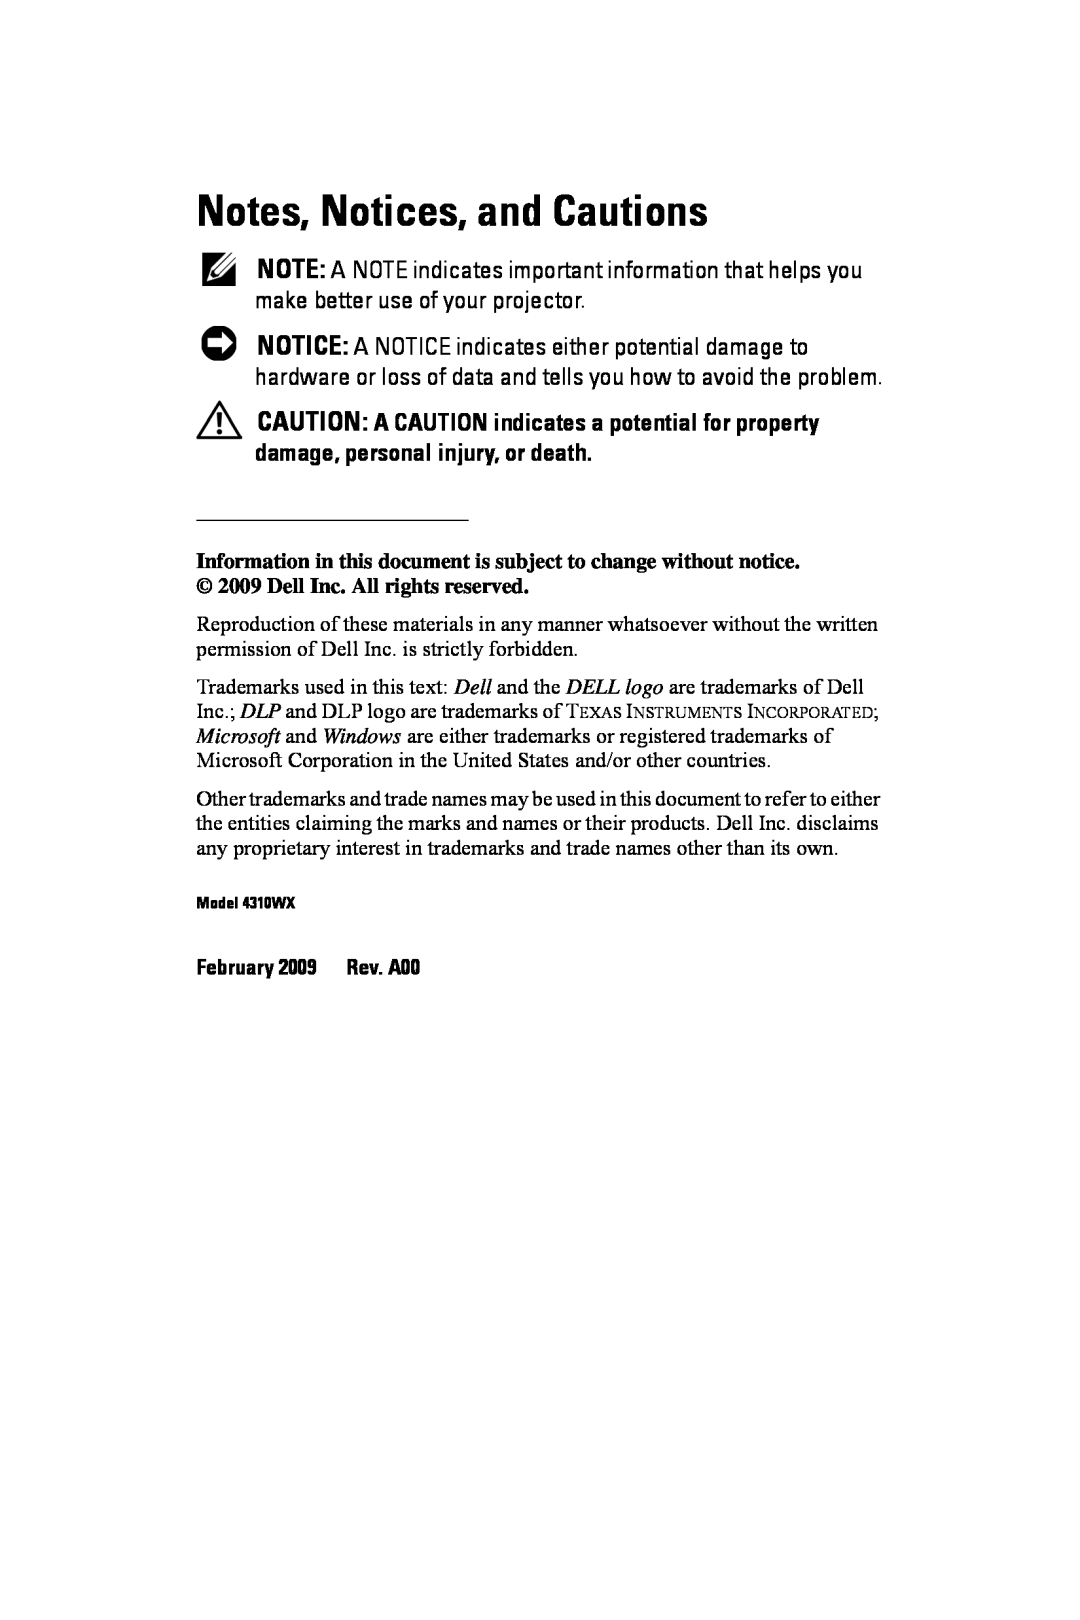 Dell 4310WX manual Notes, Notices, and Cautions, February 2009 Rev. A00 